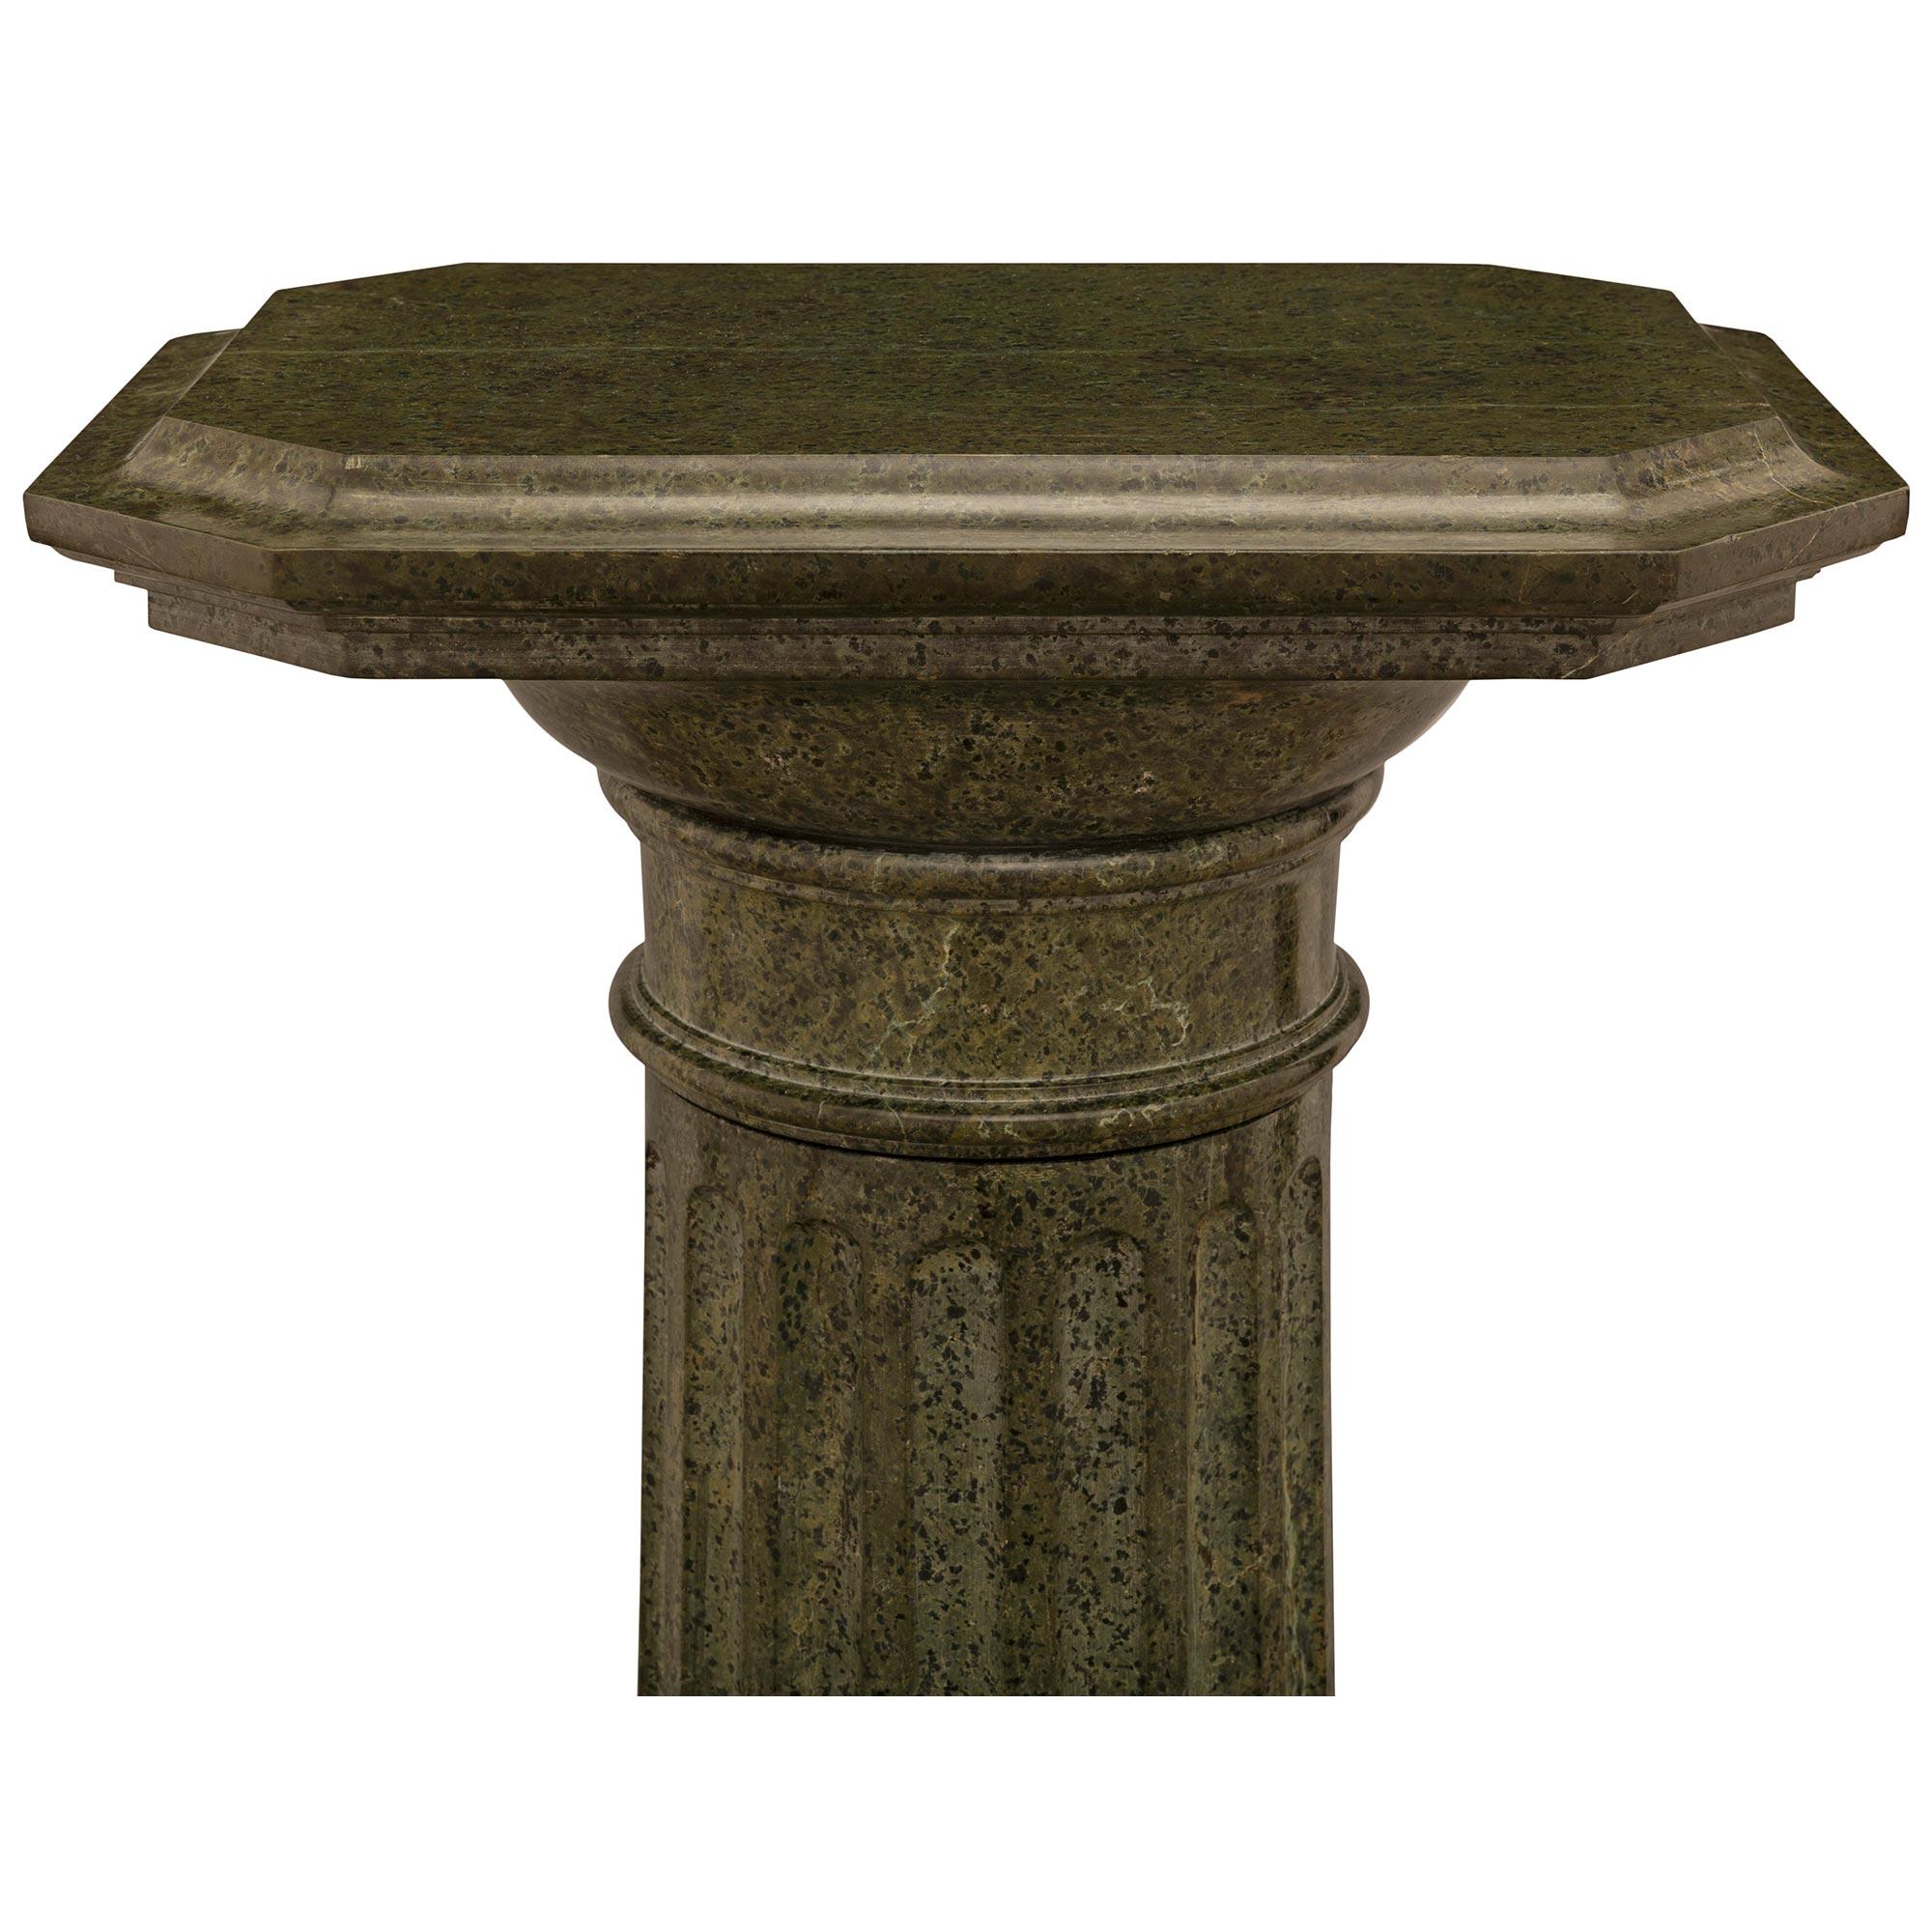 19th Century A large scaled Italian 19th century Vert de Patricia marble pedestal For Sale